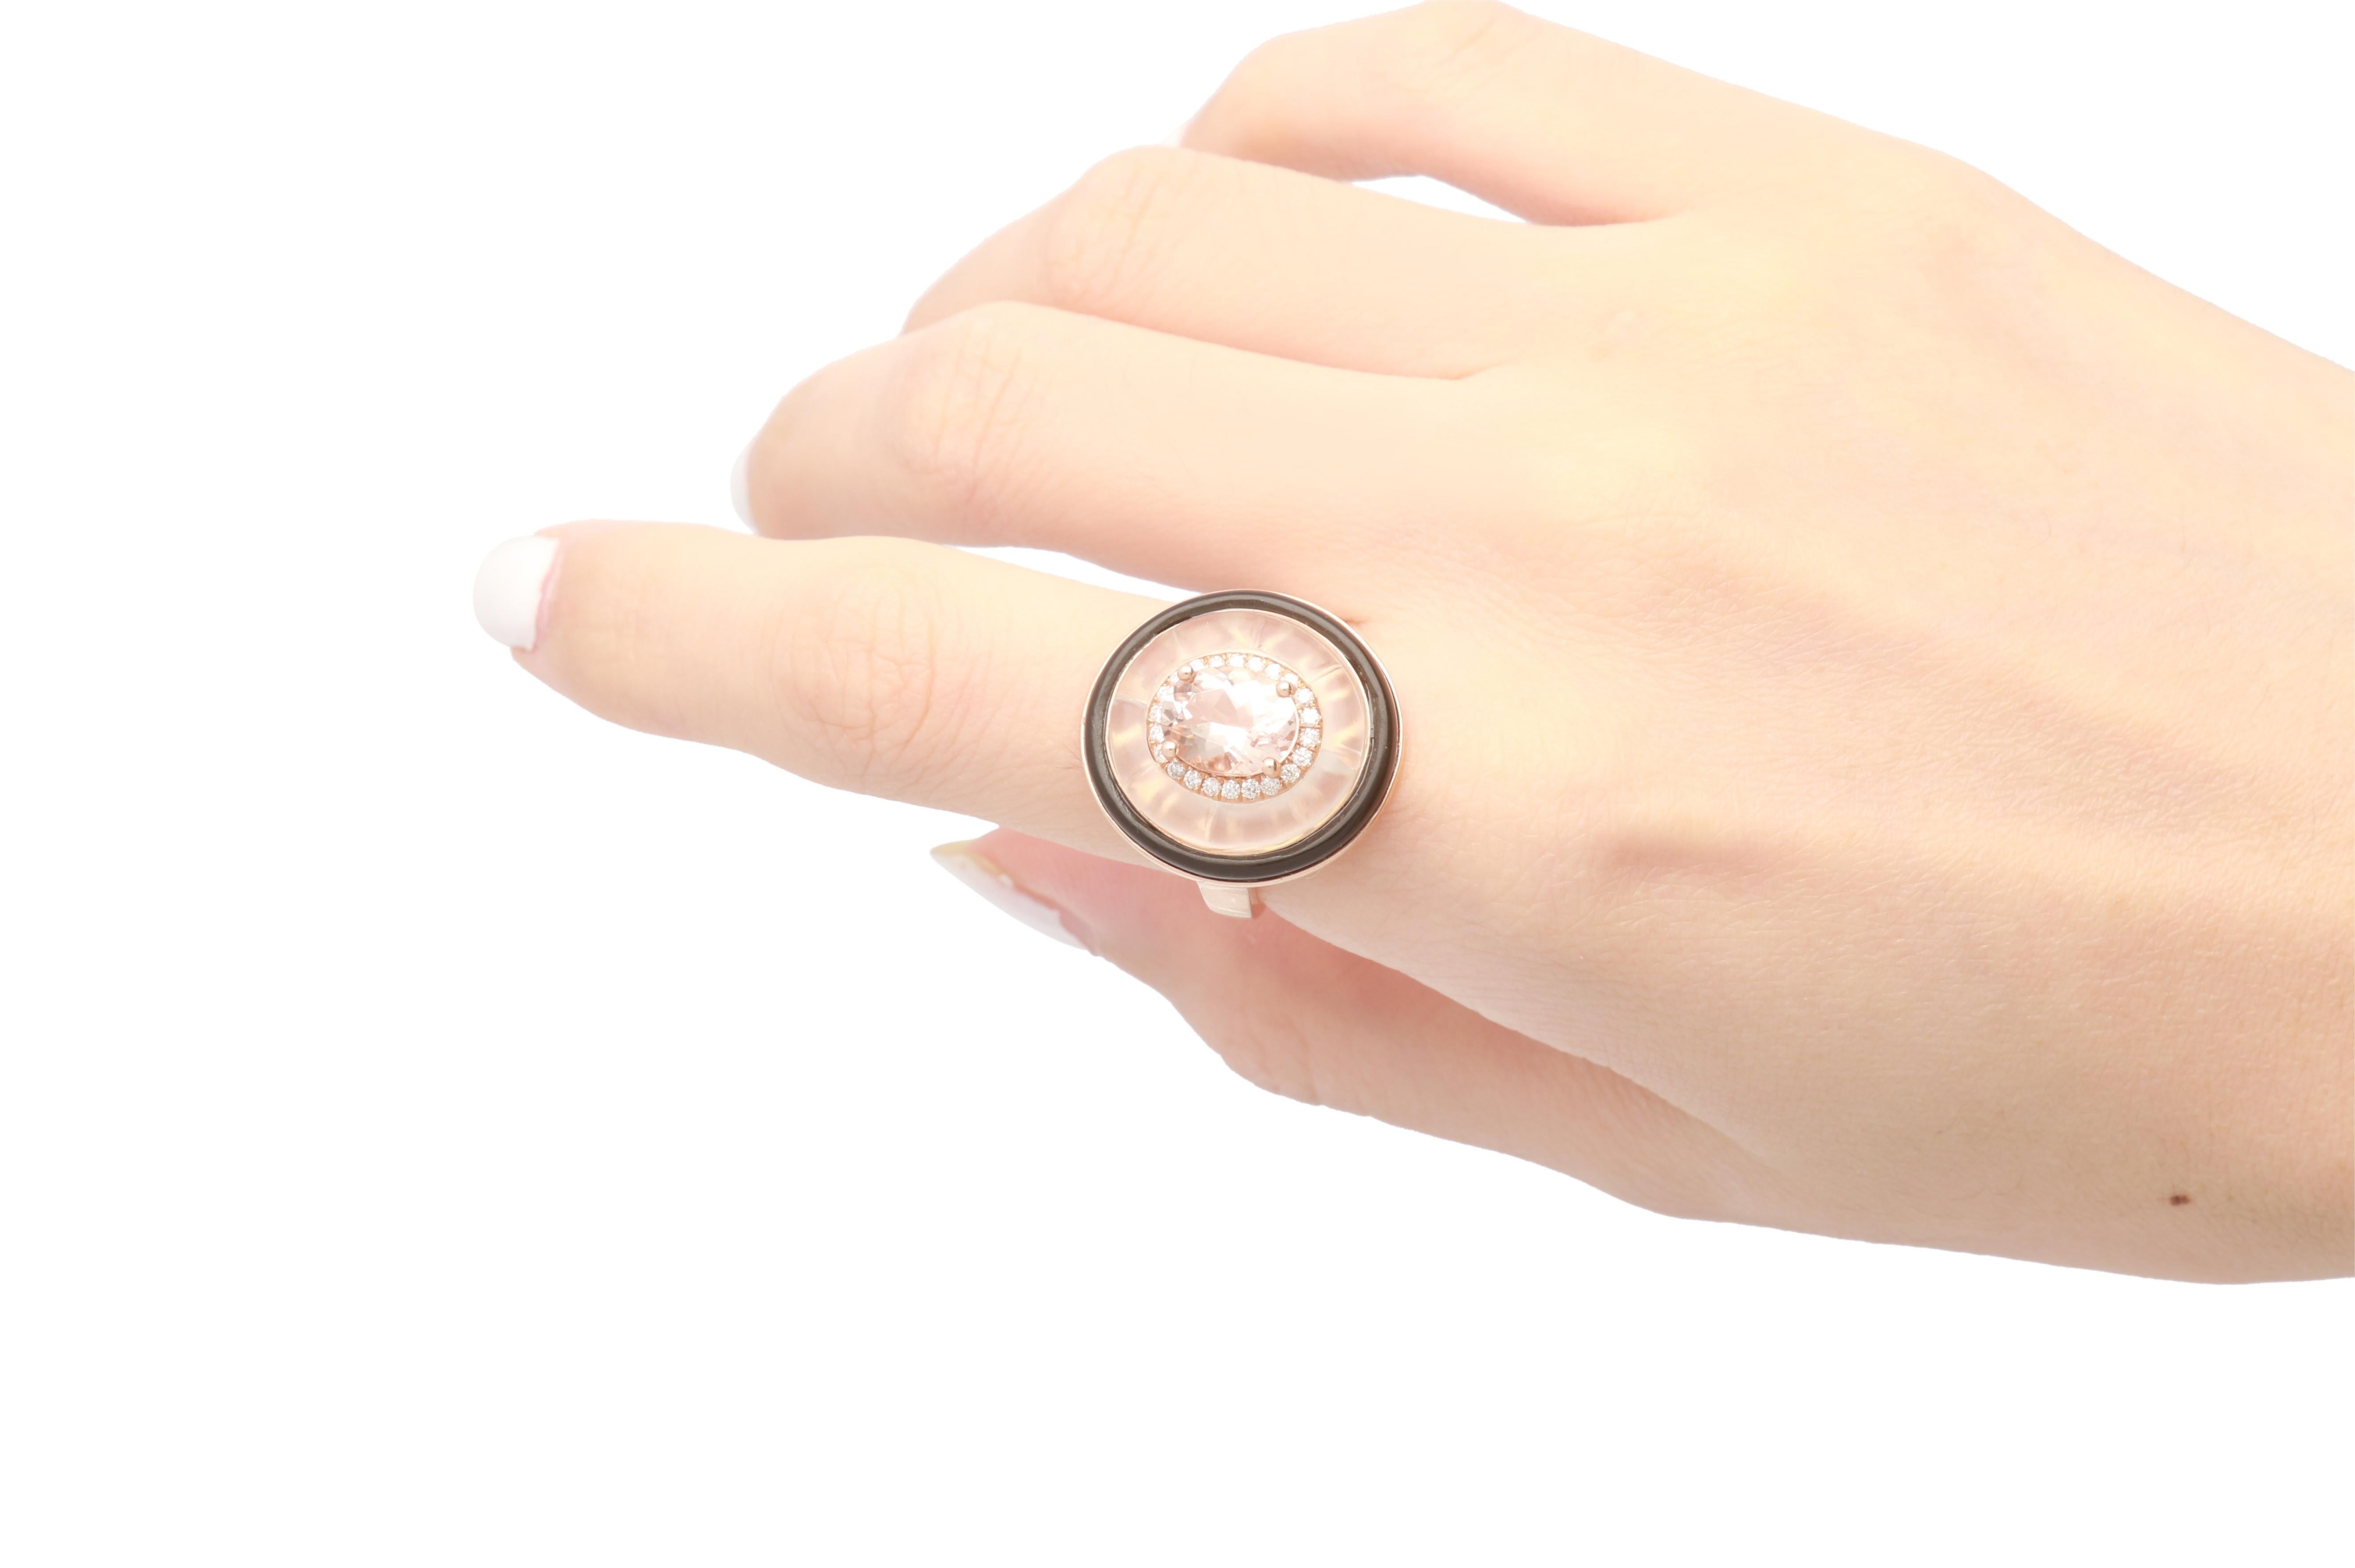 Stunning, timeless and classy eternity Unique Ring. Decorate yourself in luxury with this Gin & Grace Ring. The 14K Rose Gold jewelry boasts with Oval-cut 1 pcs 1.74 carat Morganite, 1 pcs Fancy Cut 2.28 carat, 1 pcs Onyx 1.18 carat and Natural